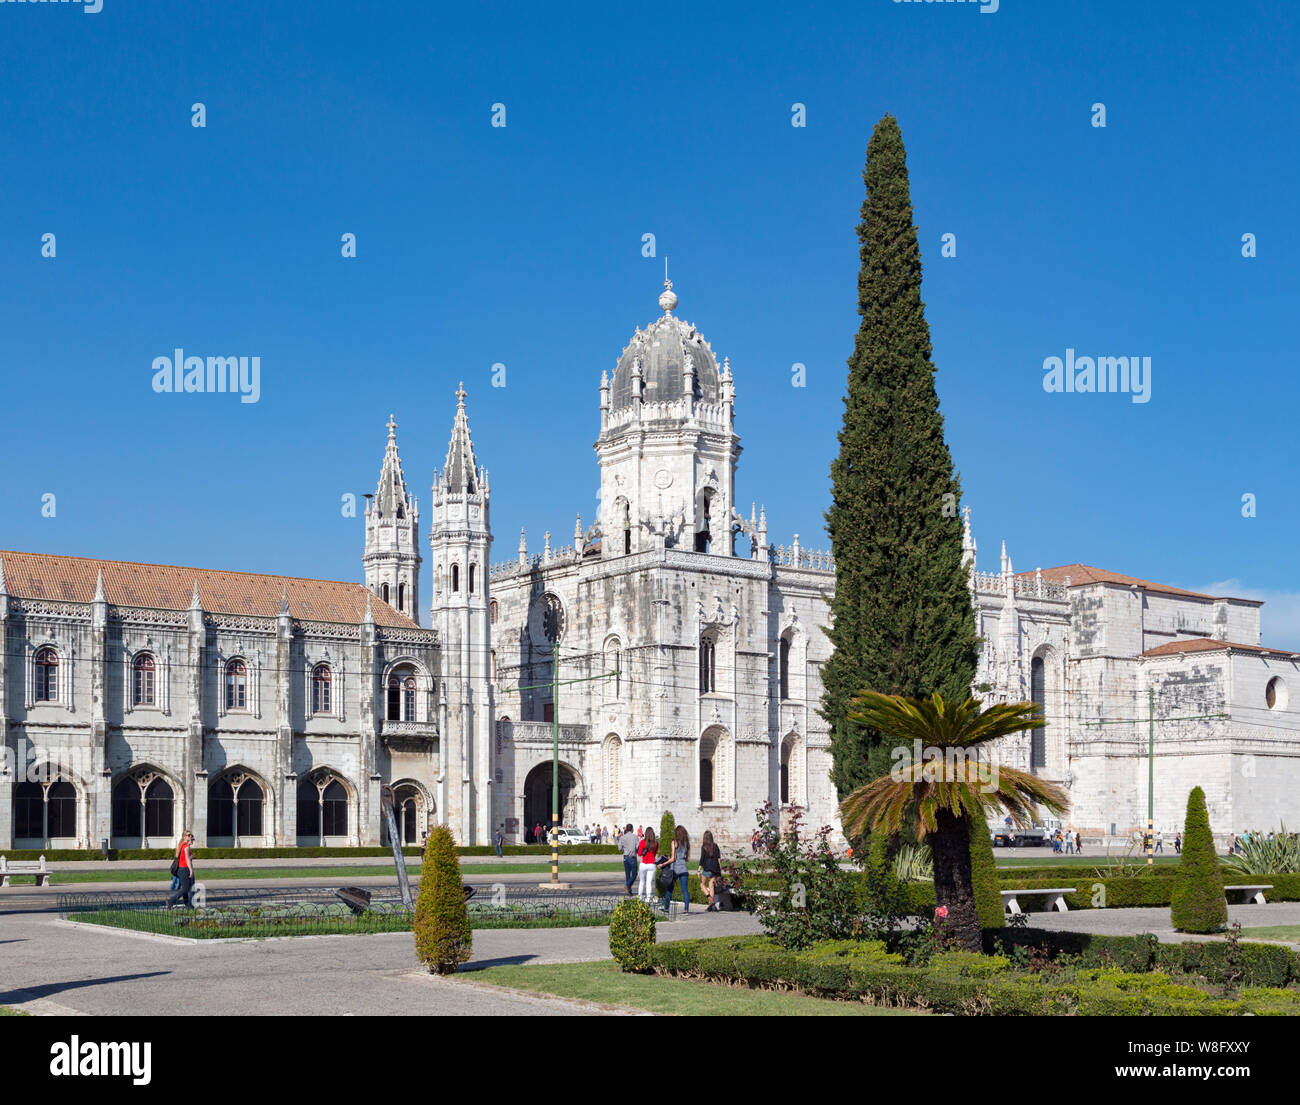 Lisbon, Portugal. The facade of the Mosteiro dos Jeronimos, or the Monastery of the Hieronymites. The monastery is considered a triumph of Ma Stock Photo